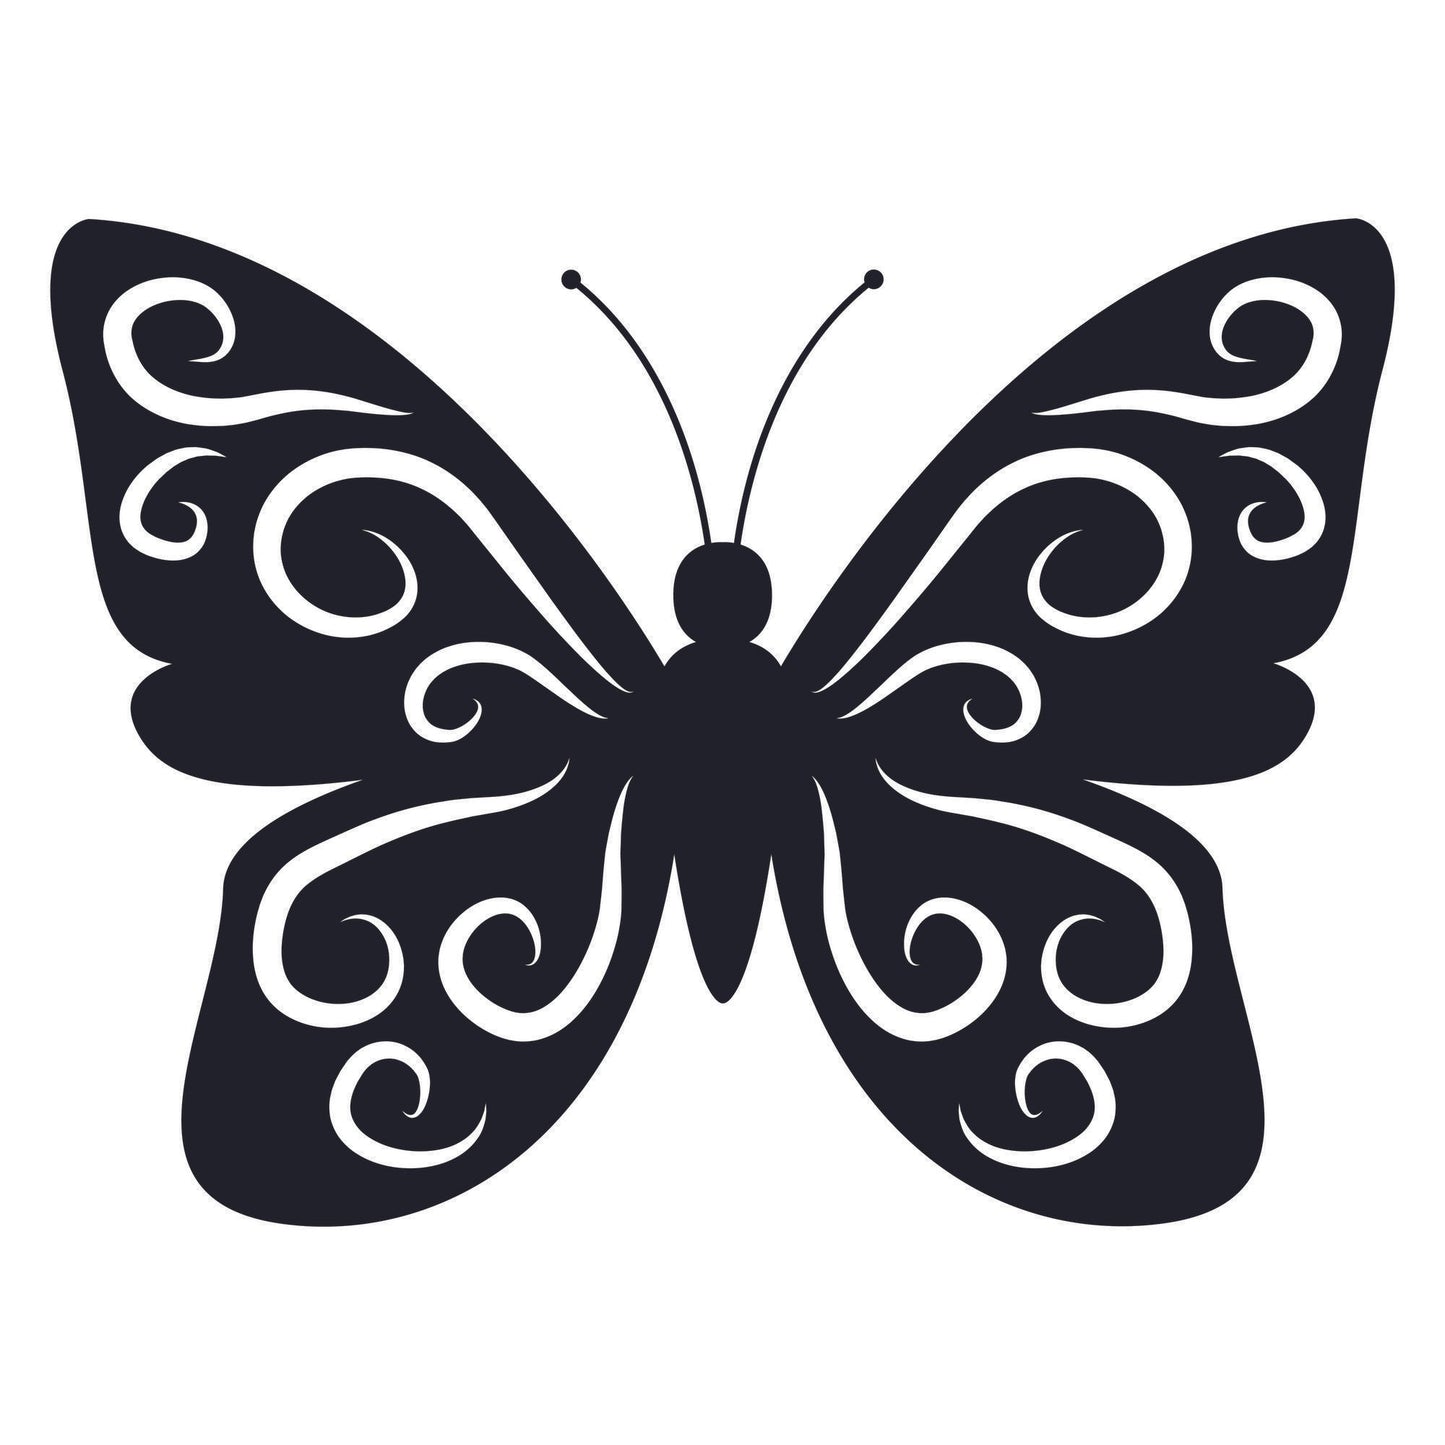 Butterfly 2 - Decorative Metal Wall Accessory